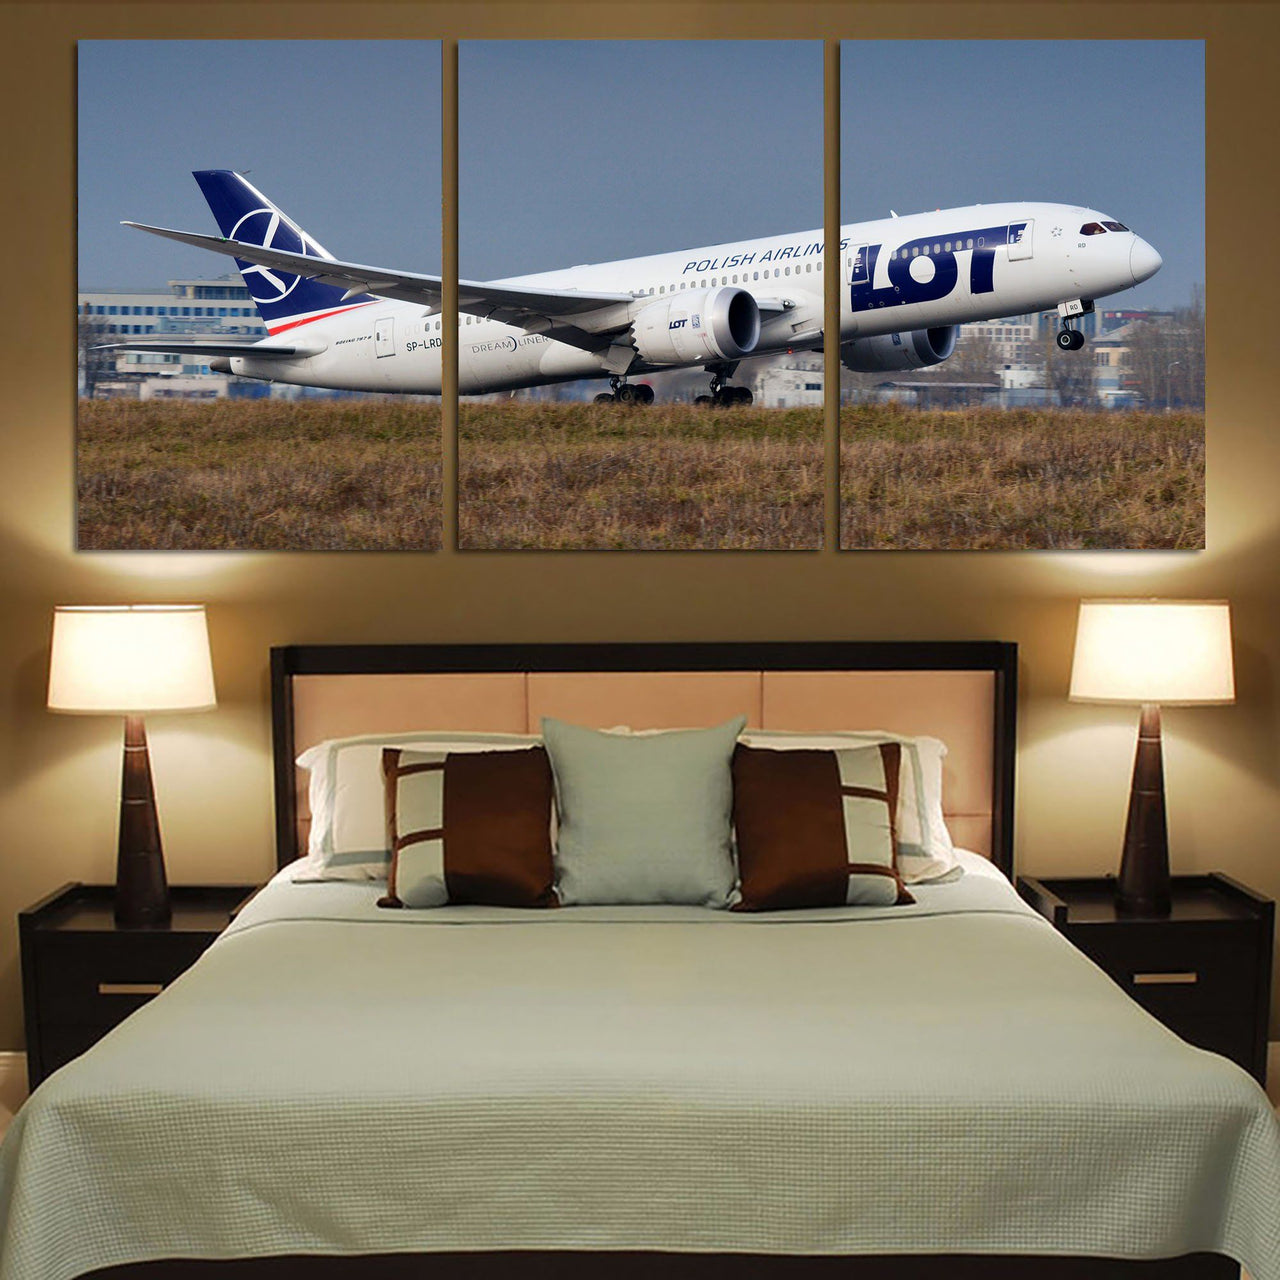 LOT Polish Airlines Boeing 787 Printed Canvas Posters (3 Pieces) Aviation Shop 